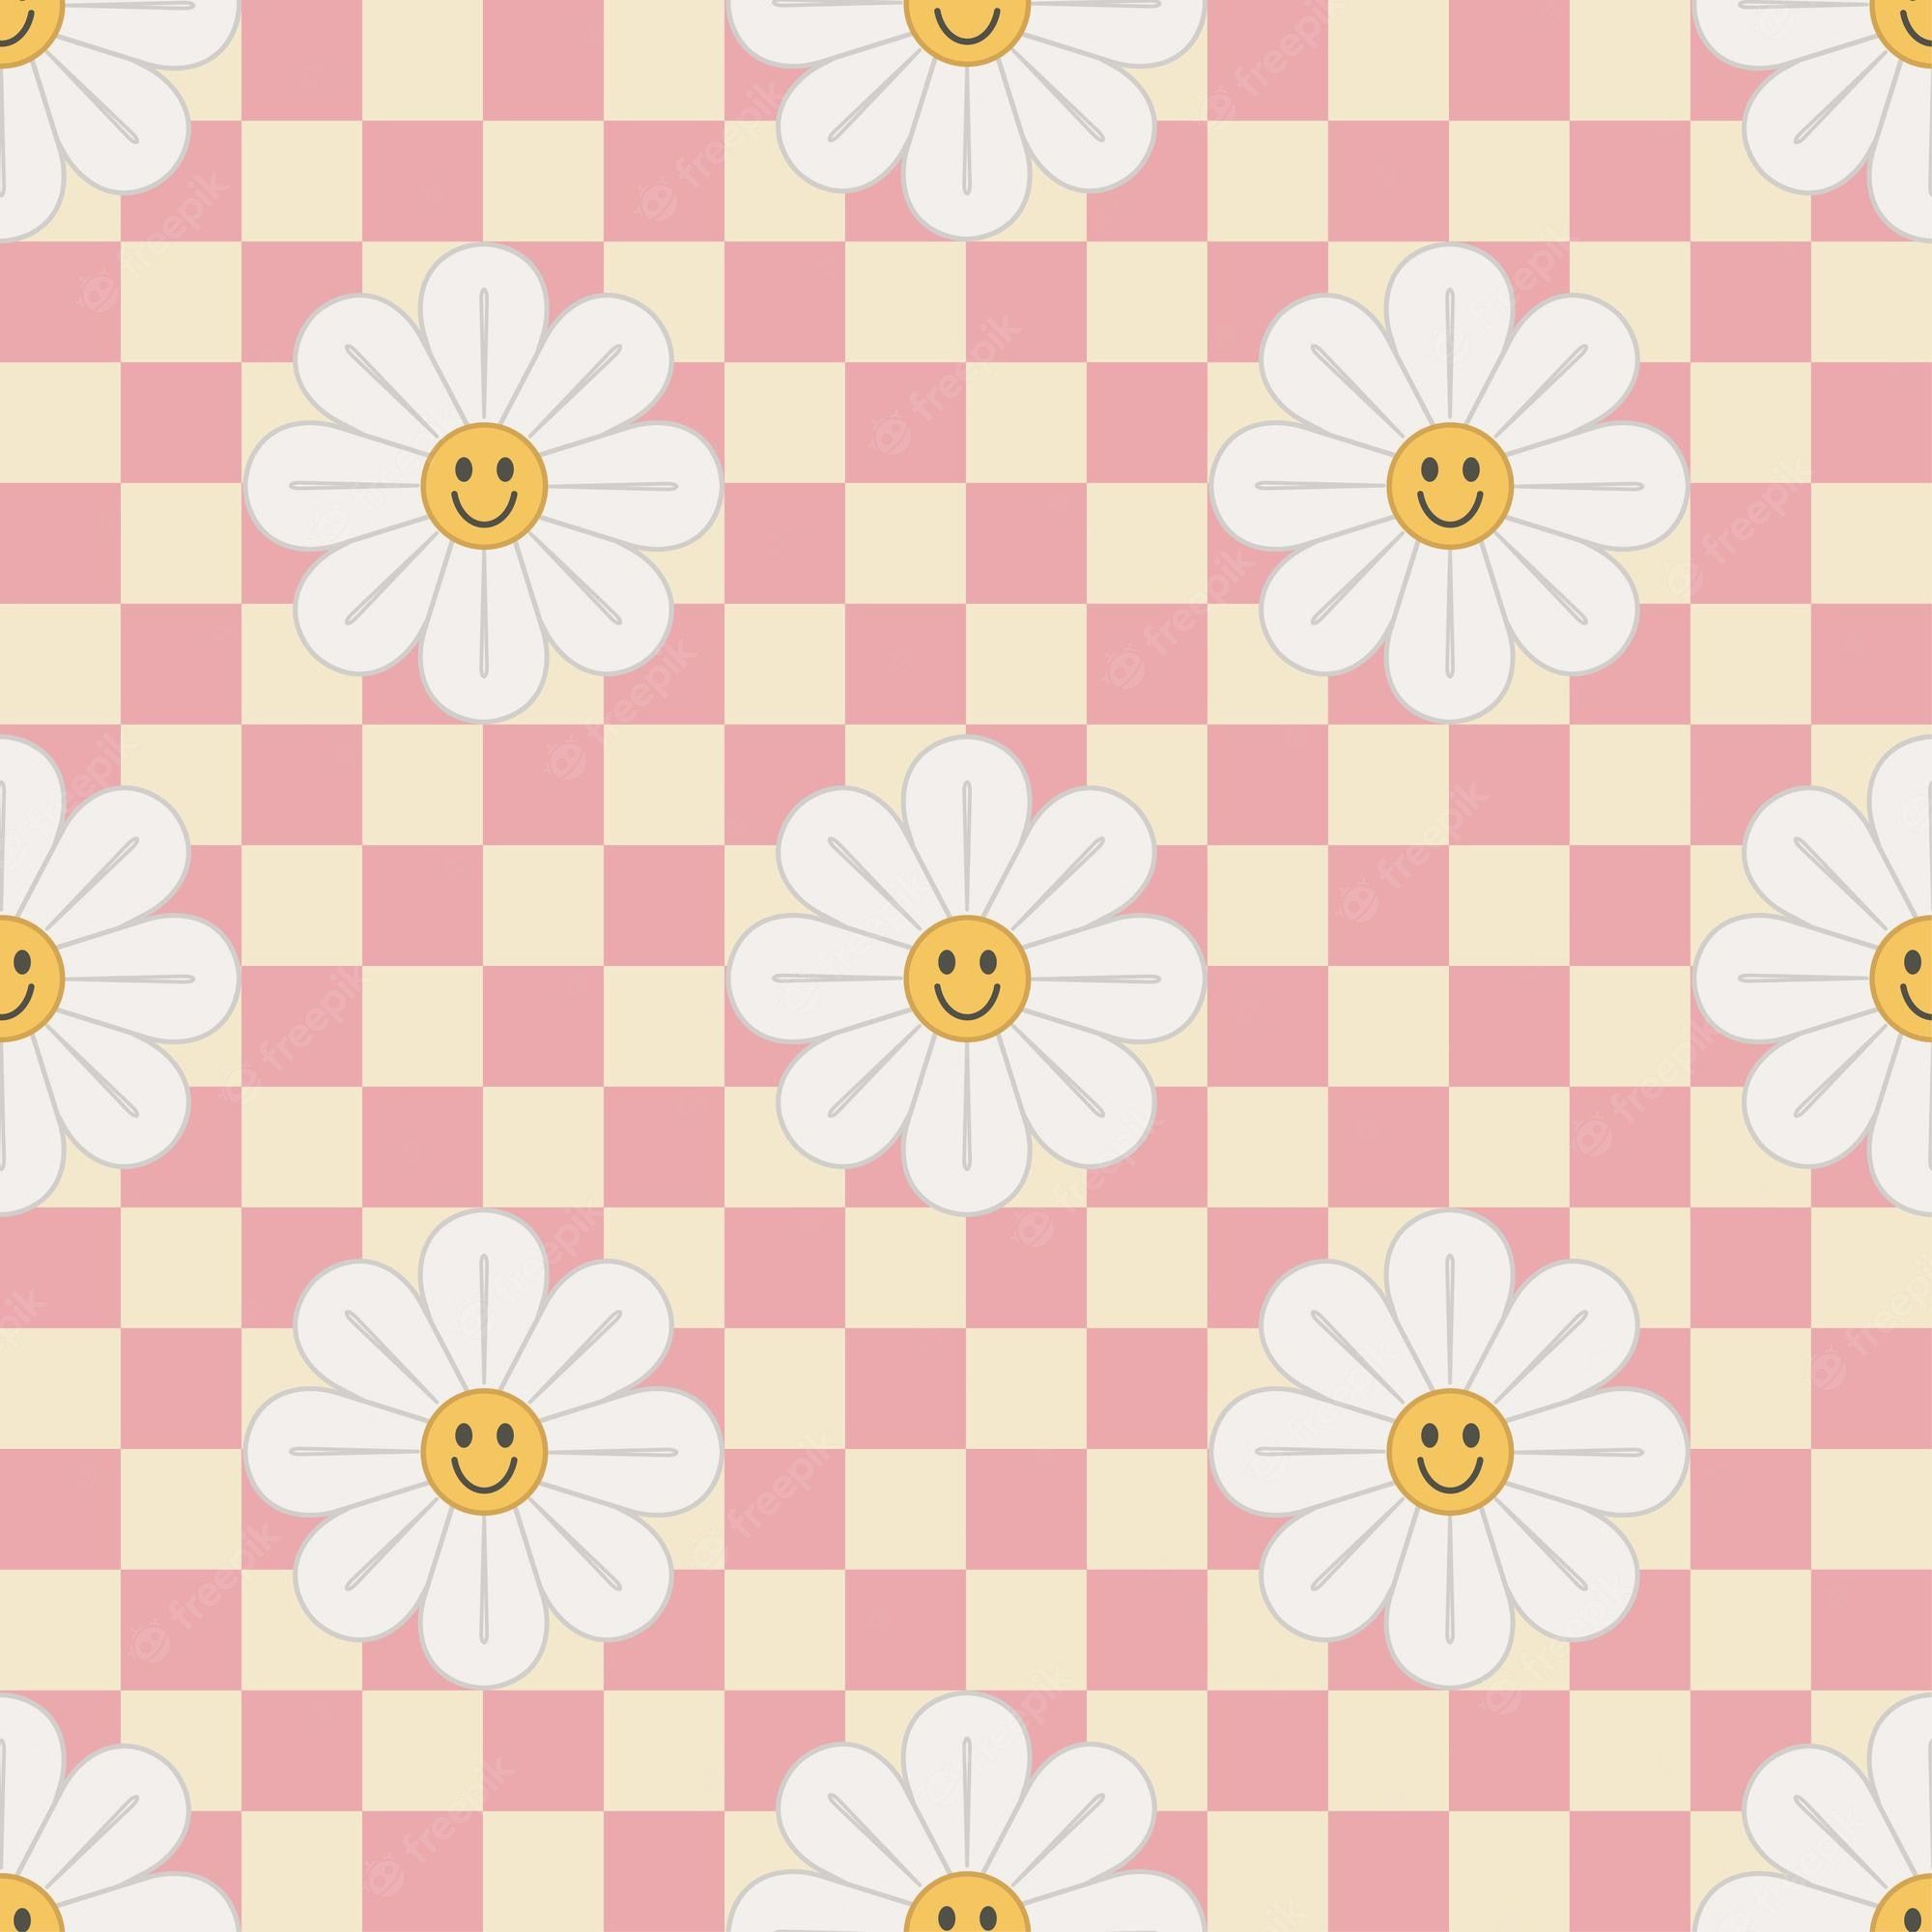 Premium Vectors Retro Smile Chamomile Seamless Pattern On Pink Checkered Background. Hippie Aesthetic. Hand Drawn Vector Illustration, Flat Design. Kids Graphic Cover Or Sticker